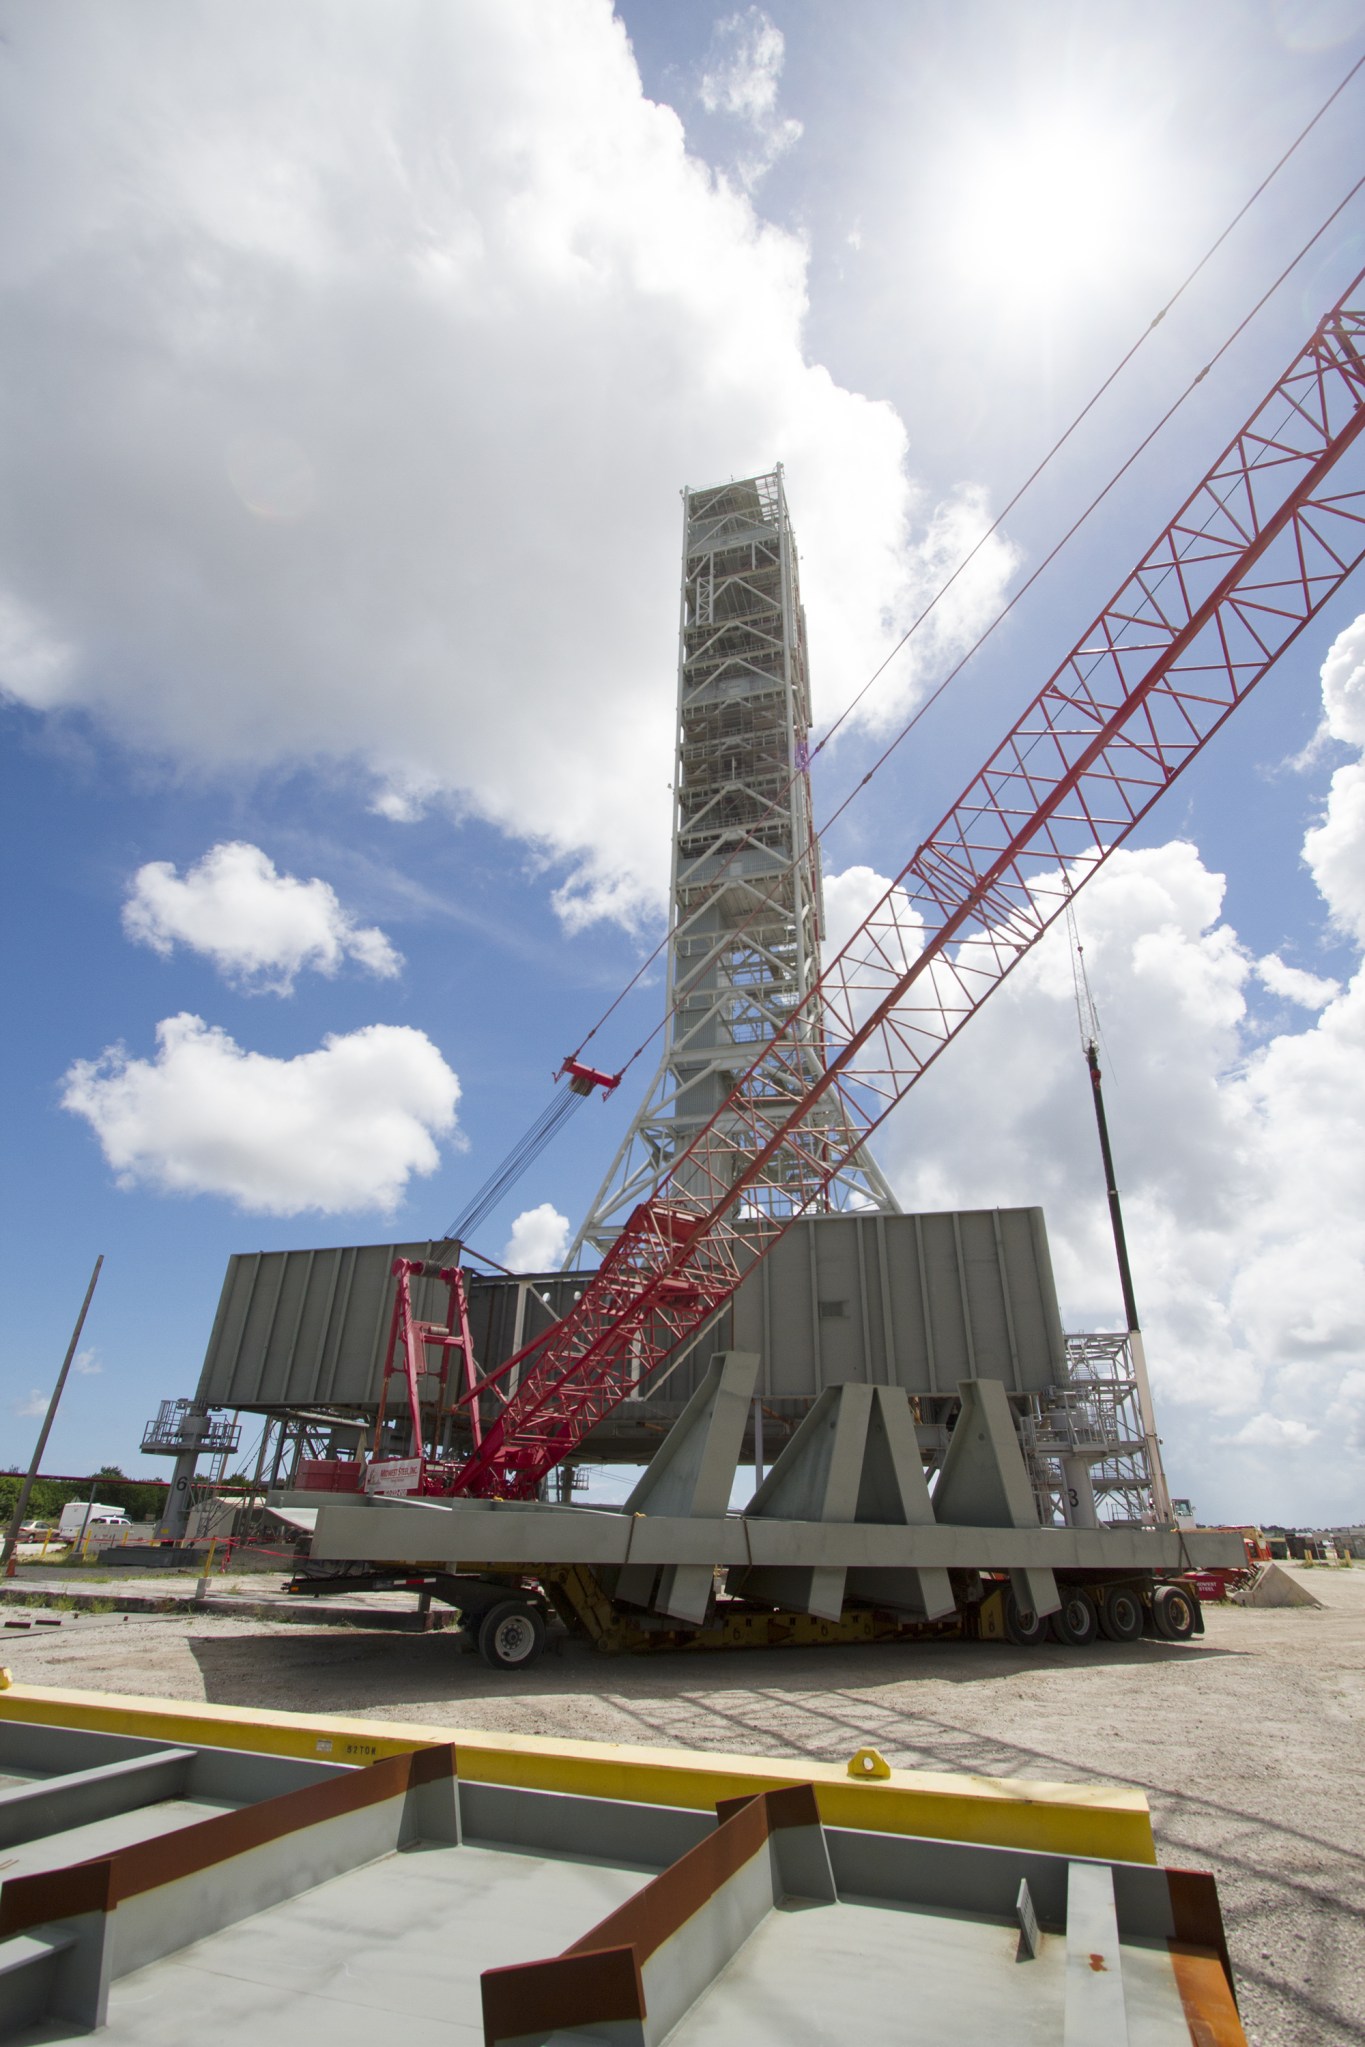 Modifications continue on the Mobile Launcher, or ML, at the Mobile Launcher Park Site at NASA's Kennedy Space Center in Florida. A crane is in place to lift a new steel beam for installation on the ML structure. The ML is being modified and strengthened to carry NASA's Space Launch System rocket and Orion spacecraft to Launch Pad 39B for its first uncrewed mission, Exploration Mission-1.